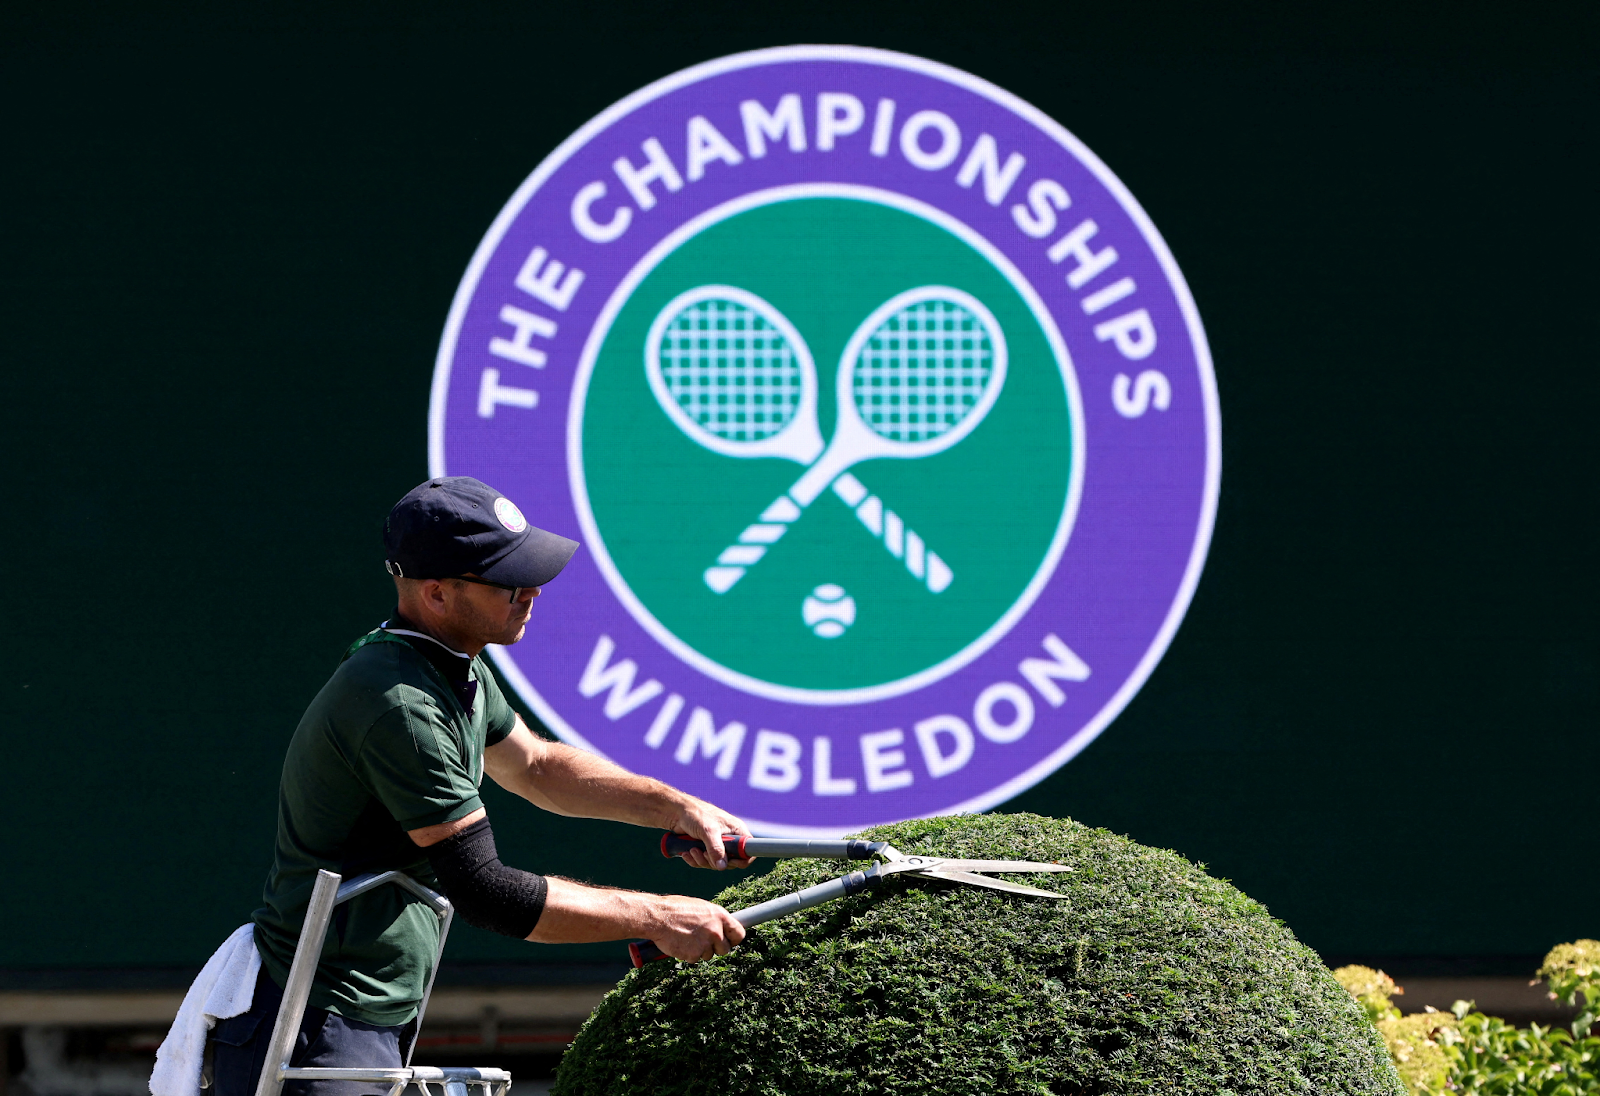 Schedule and Order of Play of Wimbledon Day 9: Tuesday, July 5 -schedule. This afternoon at Wimbledon, the first round of the quarterfinals gets underway